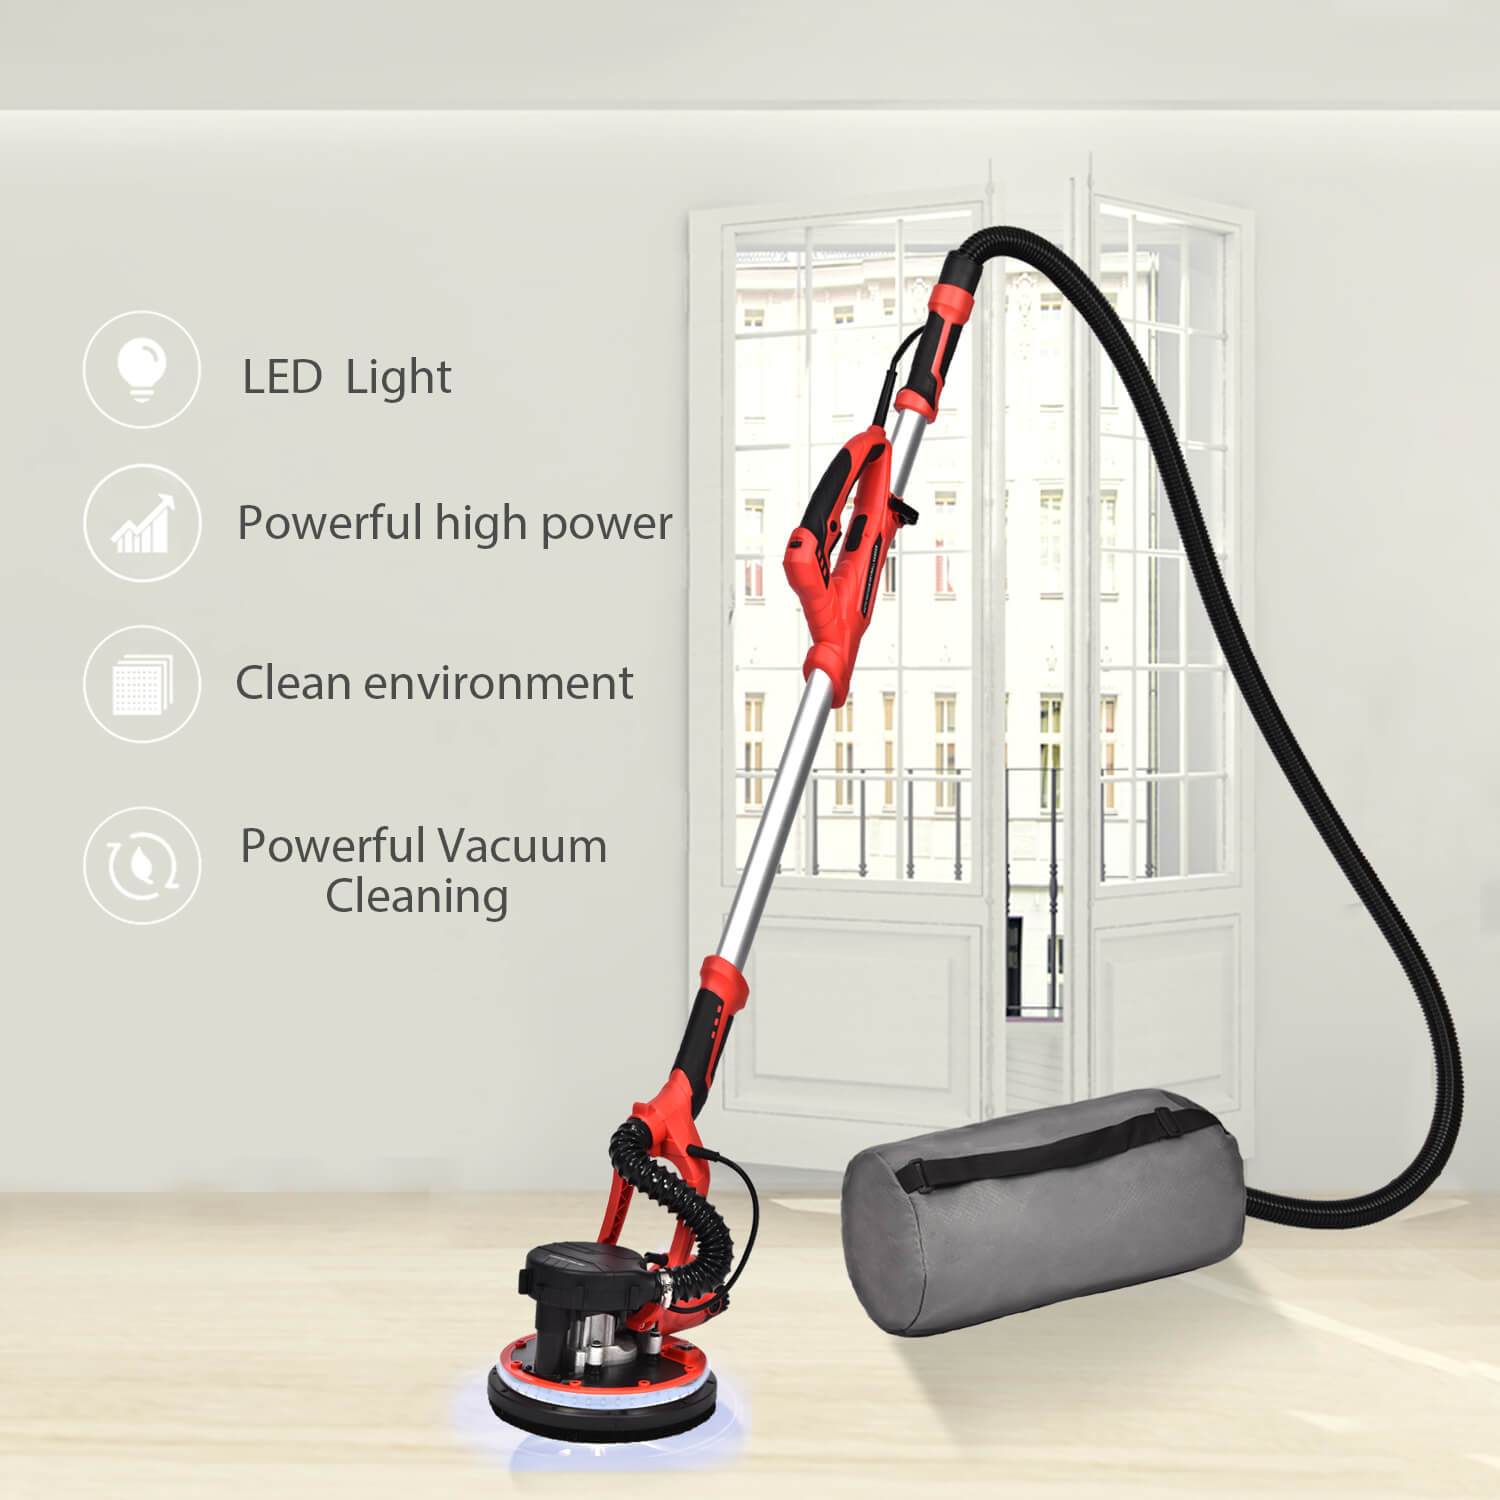 Elecwish 800W Electric Drywall Sander 5 Variable Speed with Auto